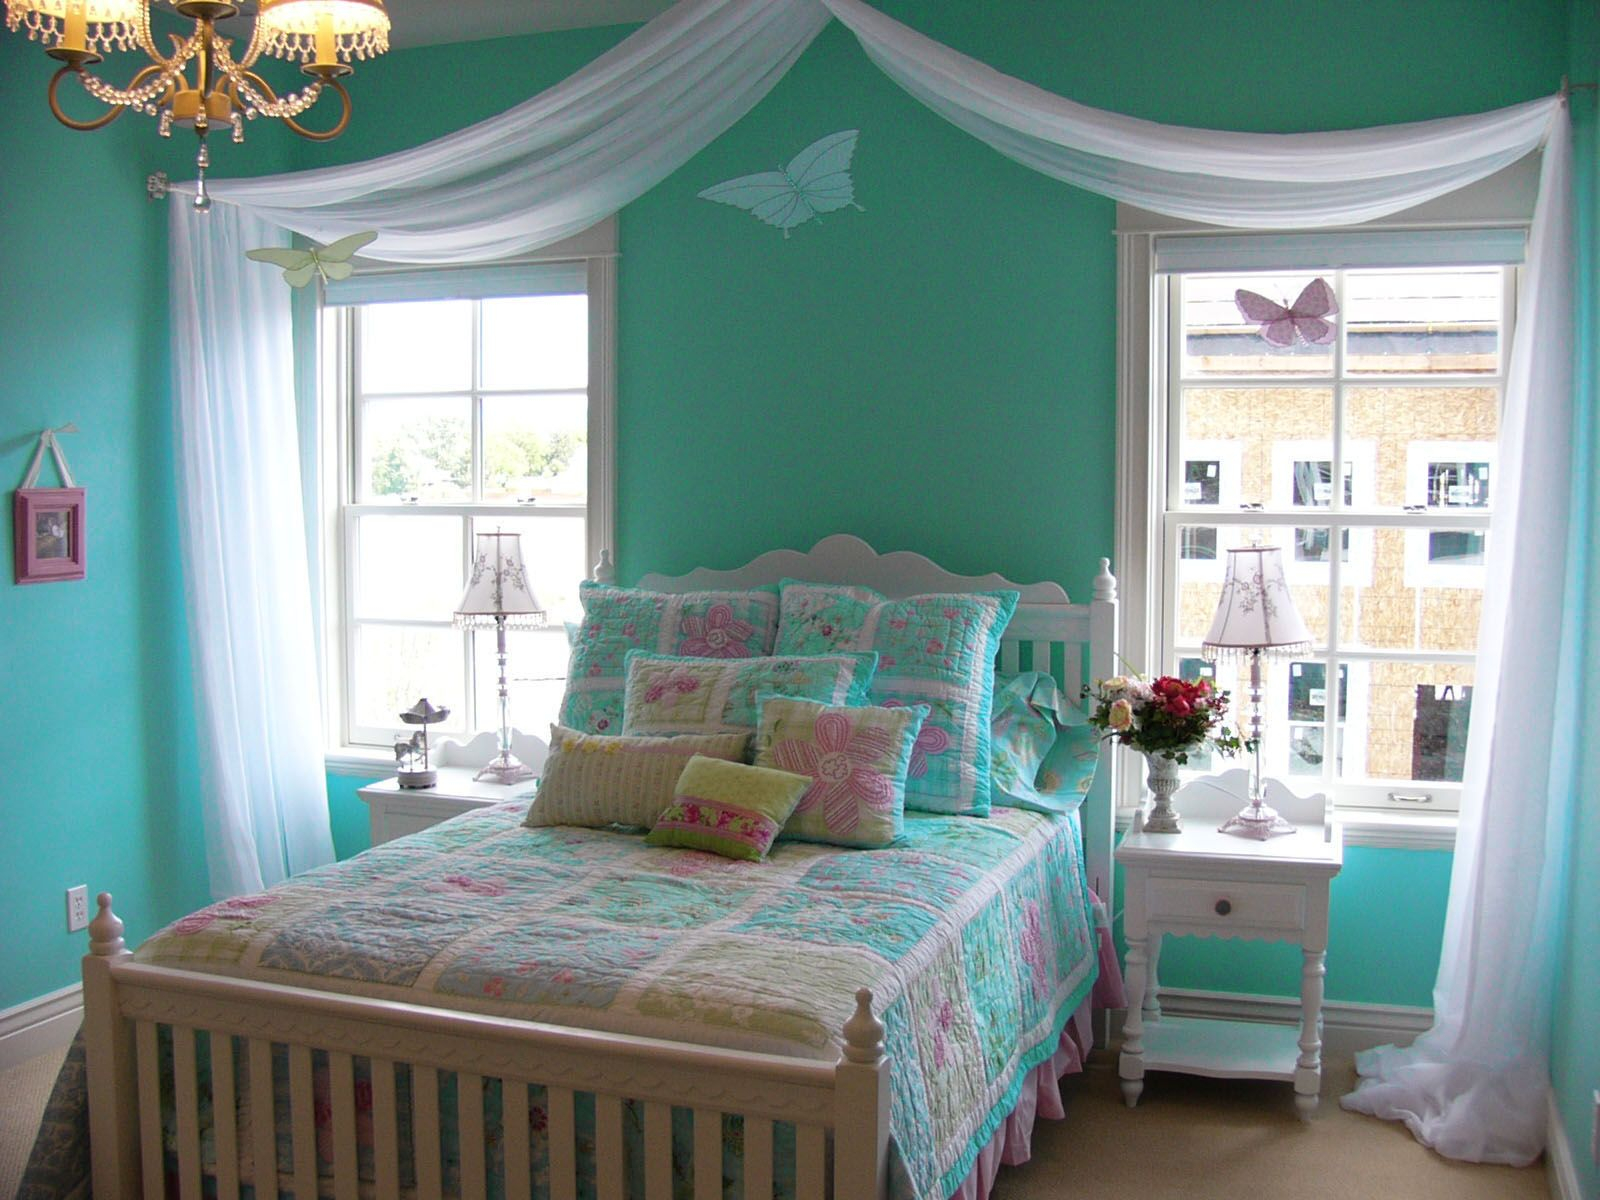 Turquoise Wall Paint Color Bedroom Ideas Decorating Using Turquoise regarding dimensions 1600 X 1200